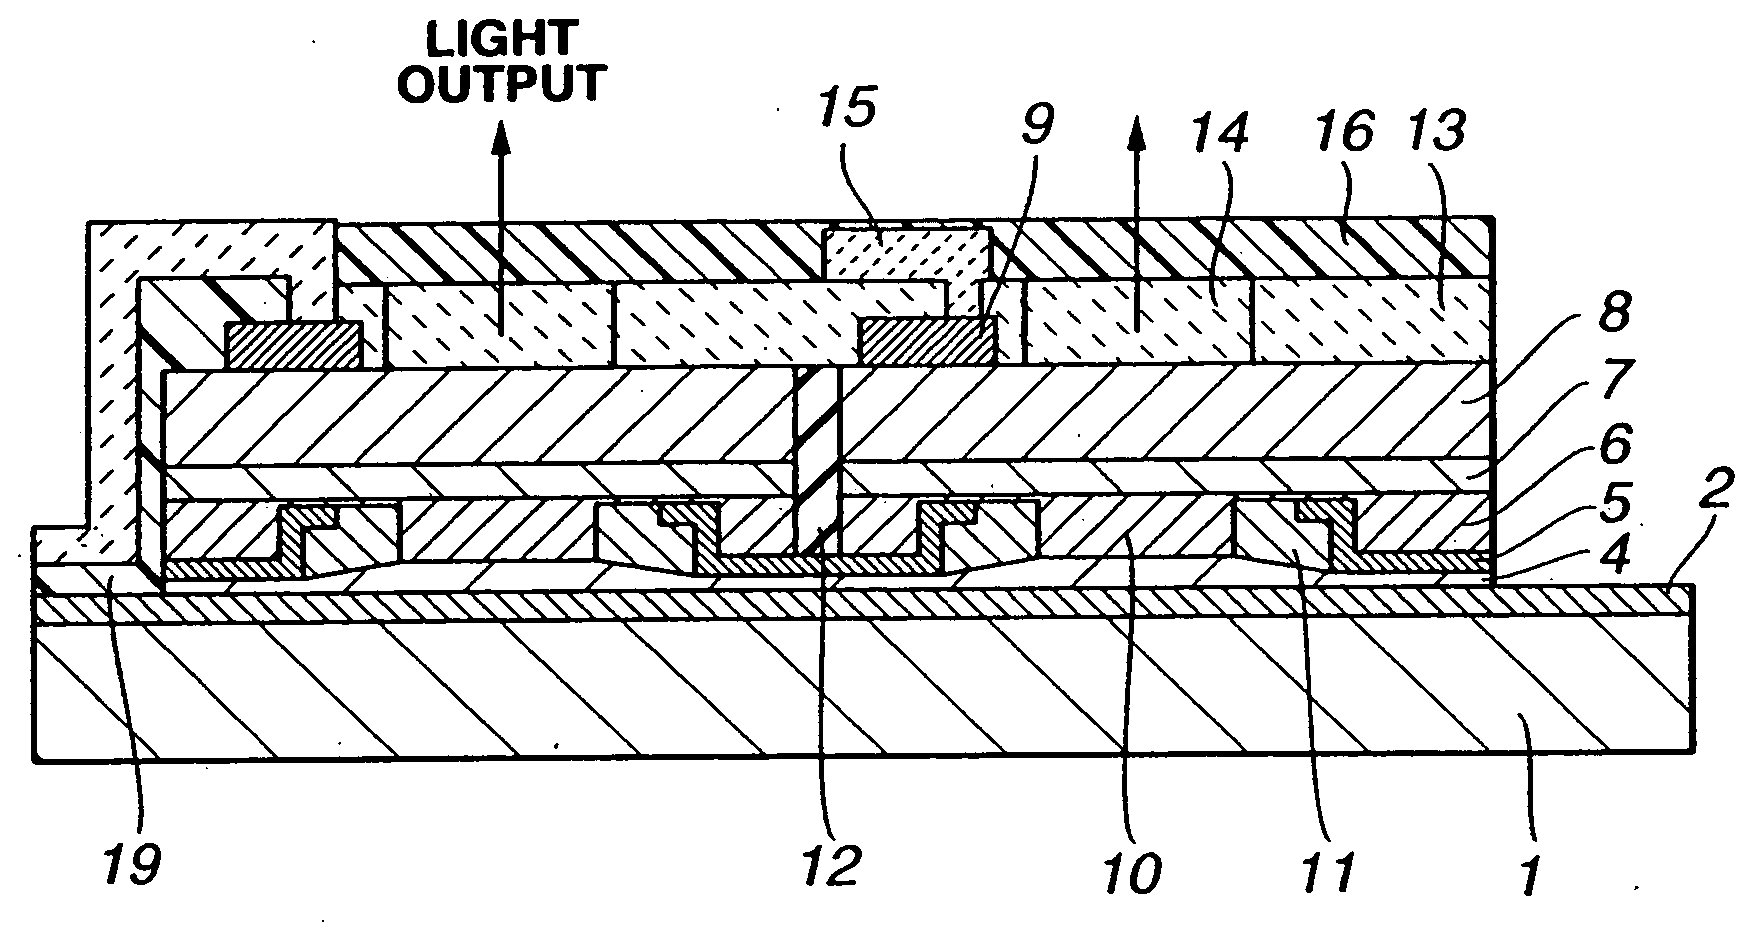 Surface optical device apparatus, method of fabricating the same, and apparatus using the same